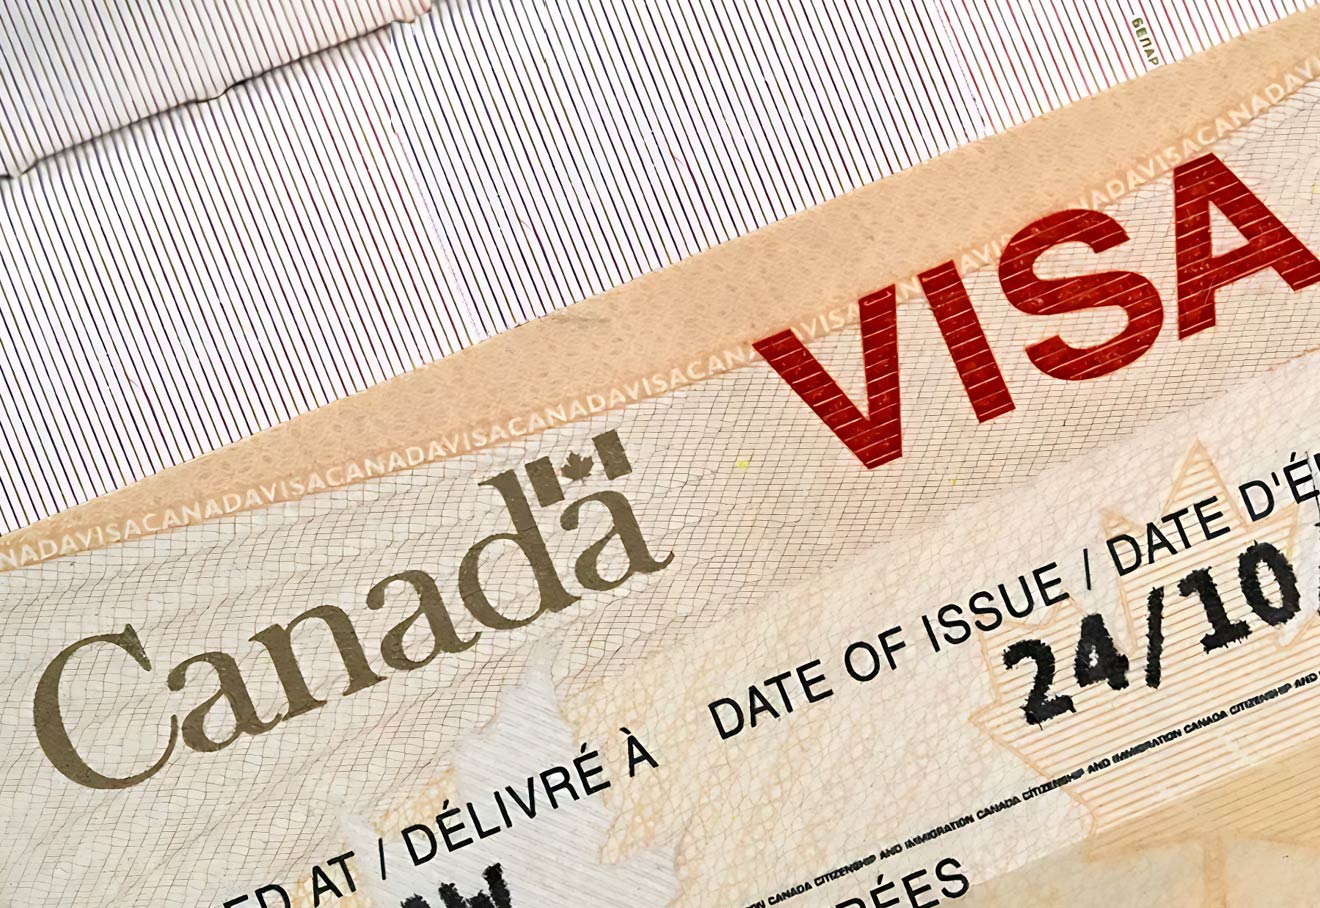 India’s Visa Suspension In Canada To Have Minimal Impact On Business